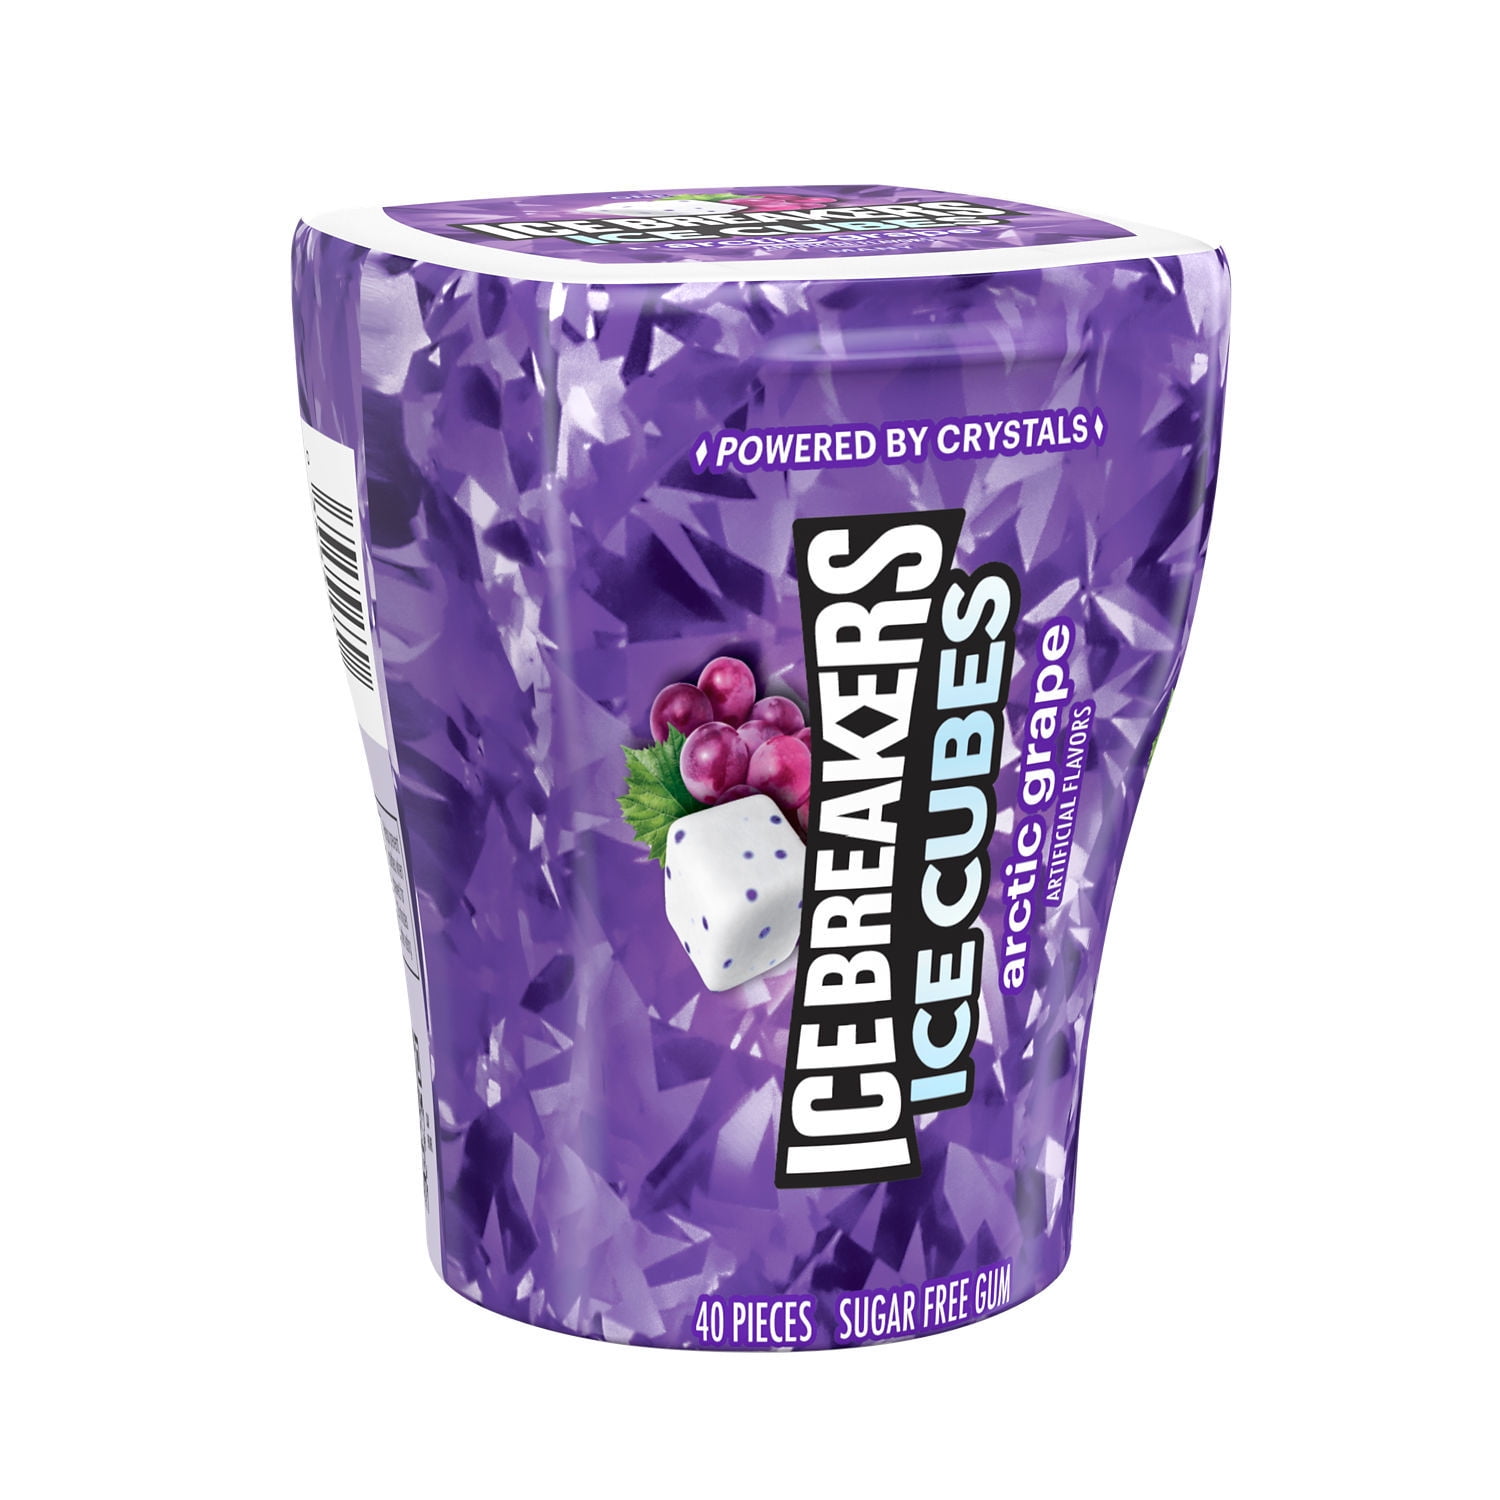 Ice Breakers Ice Cubes Arctic Grape Sugar Free Chewing Gum, Bottle 3.24 oz, 40 Pieces